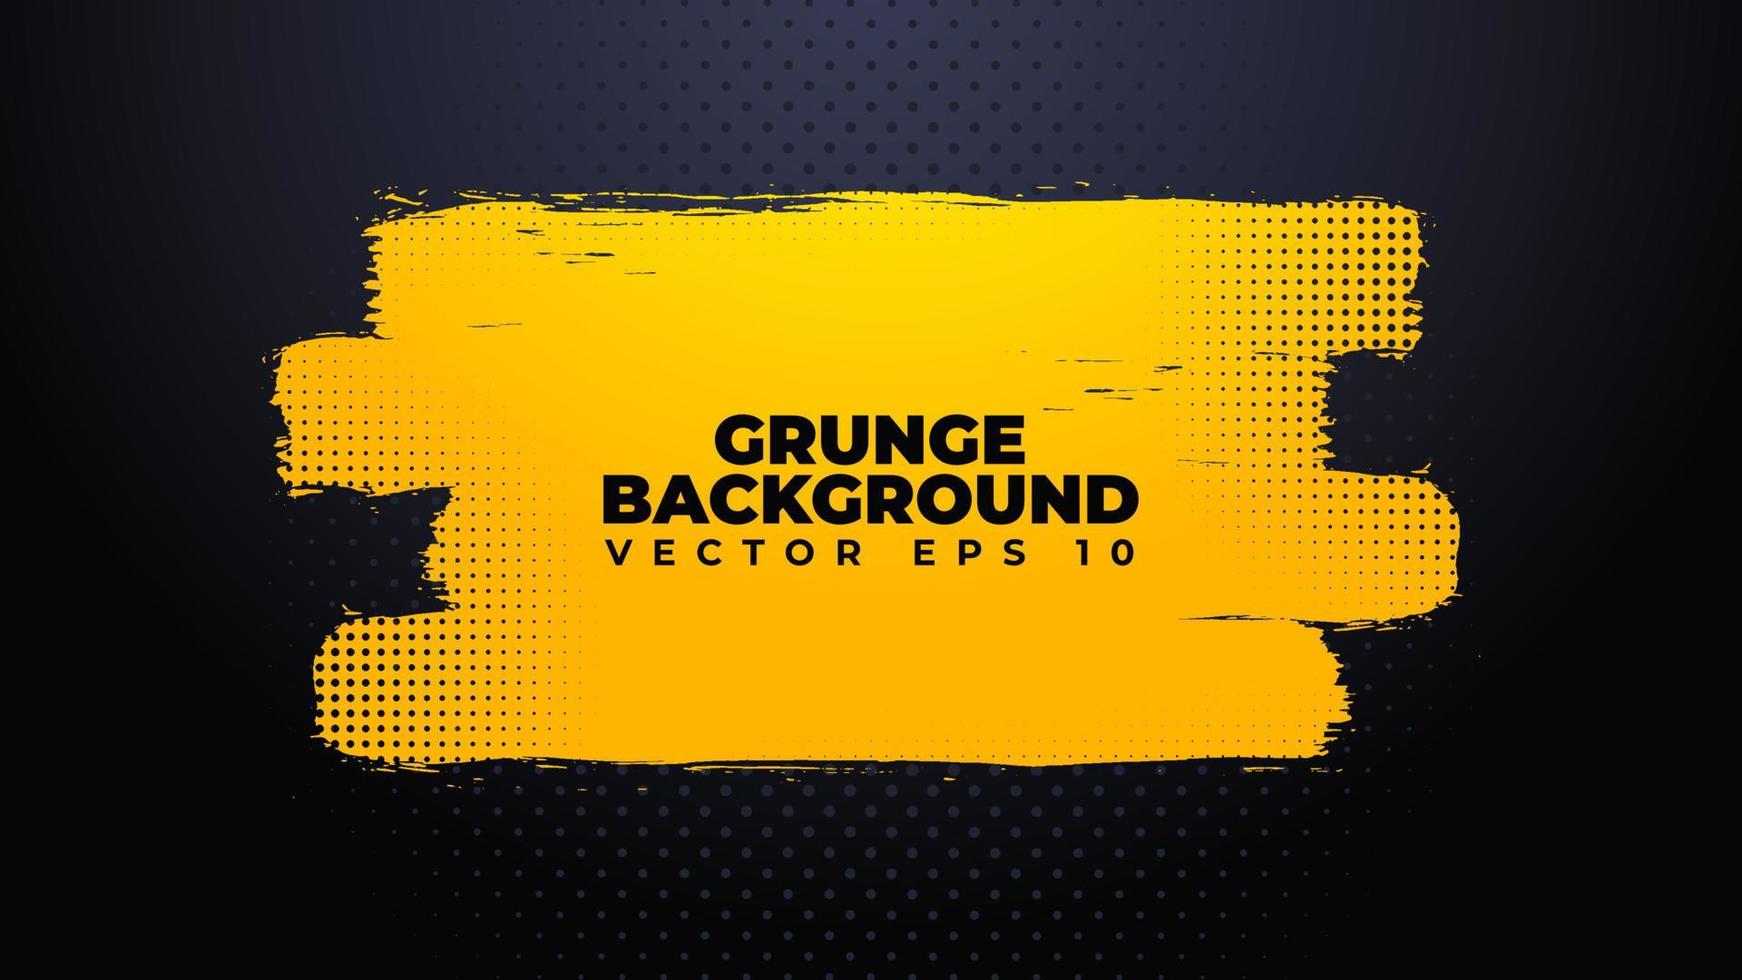 Abstract grunge background vector with paint brush and halftone effect, horizontal banner template design with gradient black and yellow color